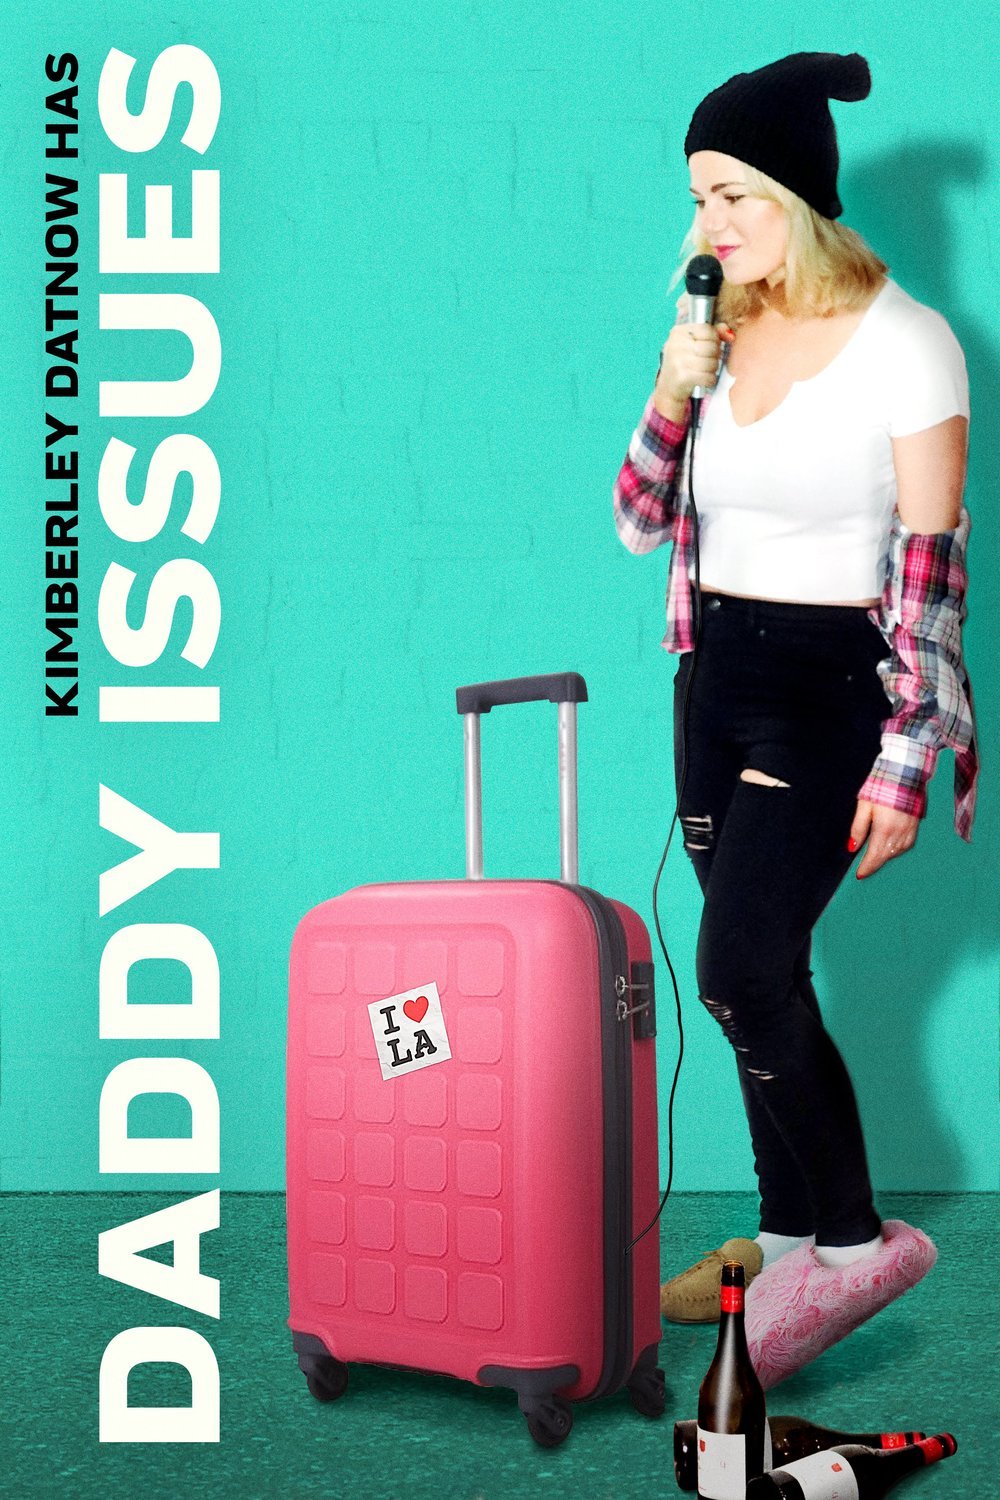 Poster of the movie Daddy Issues